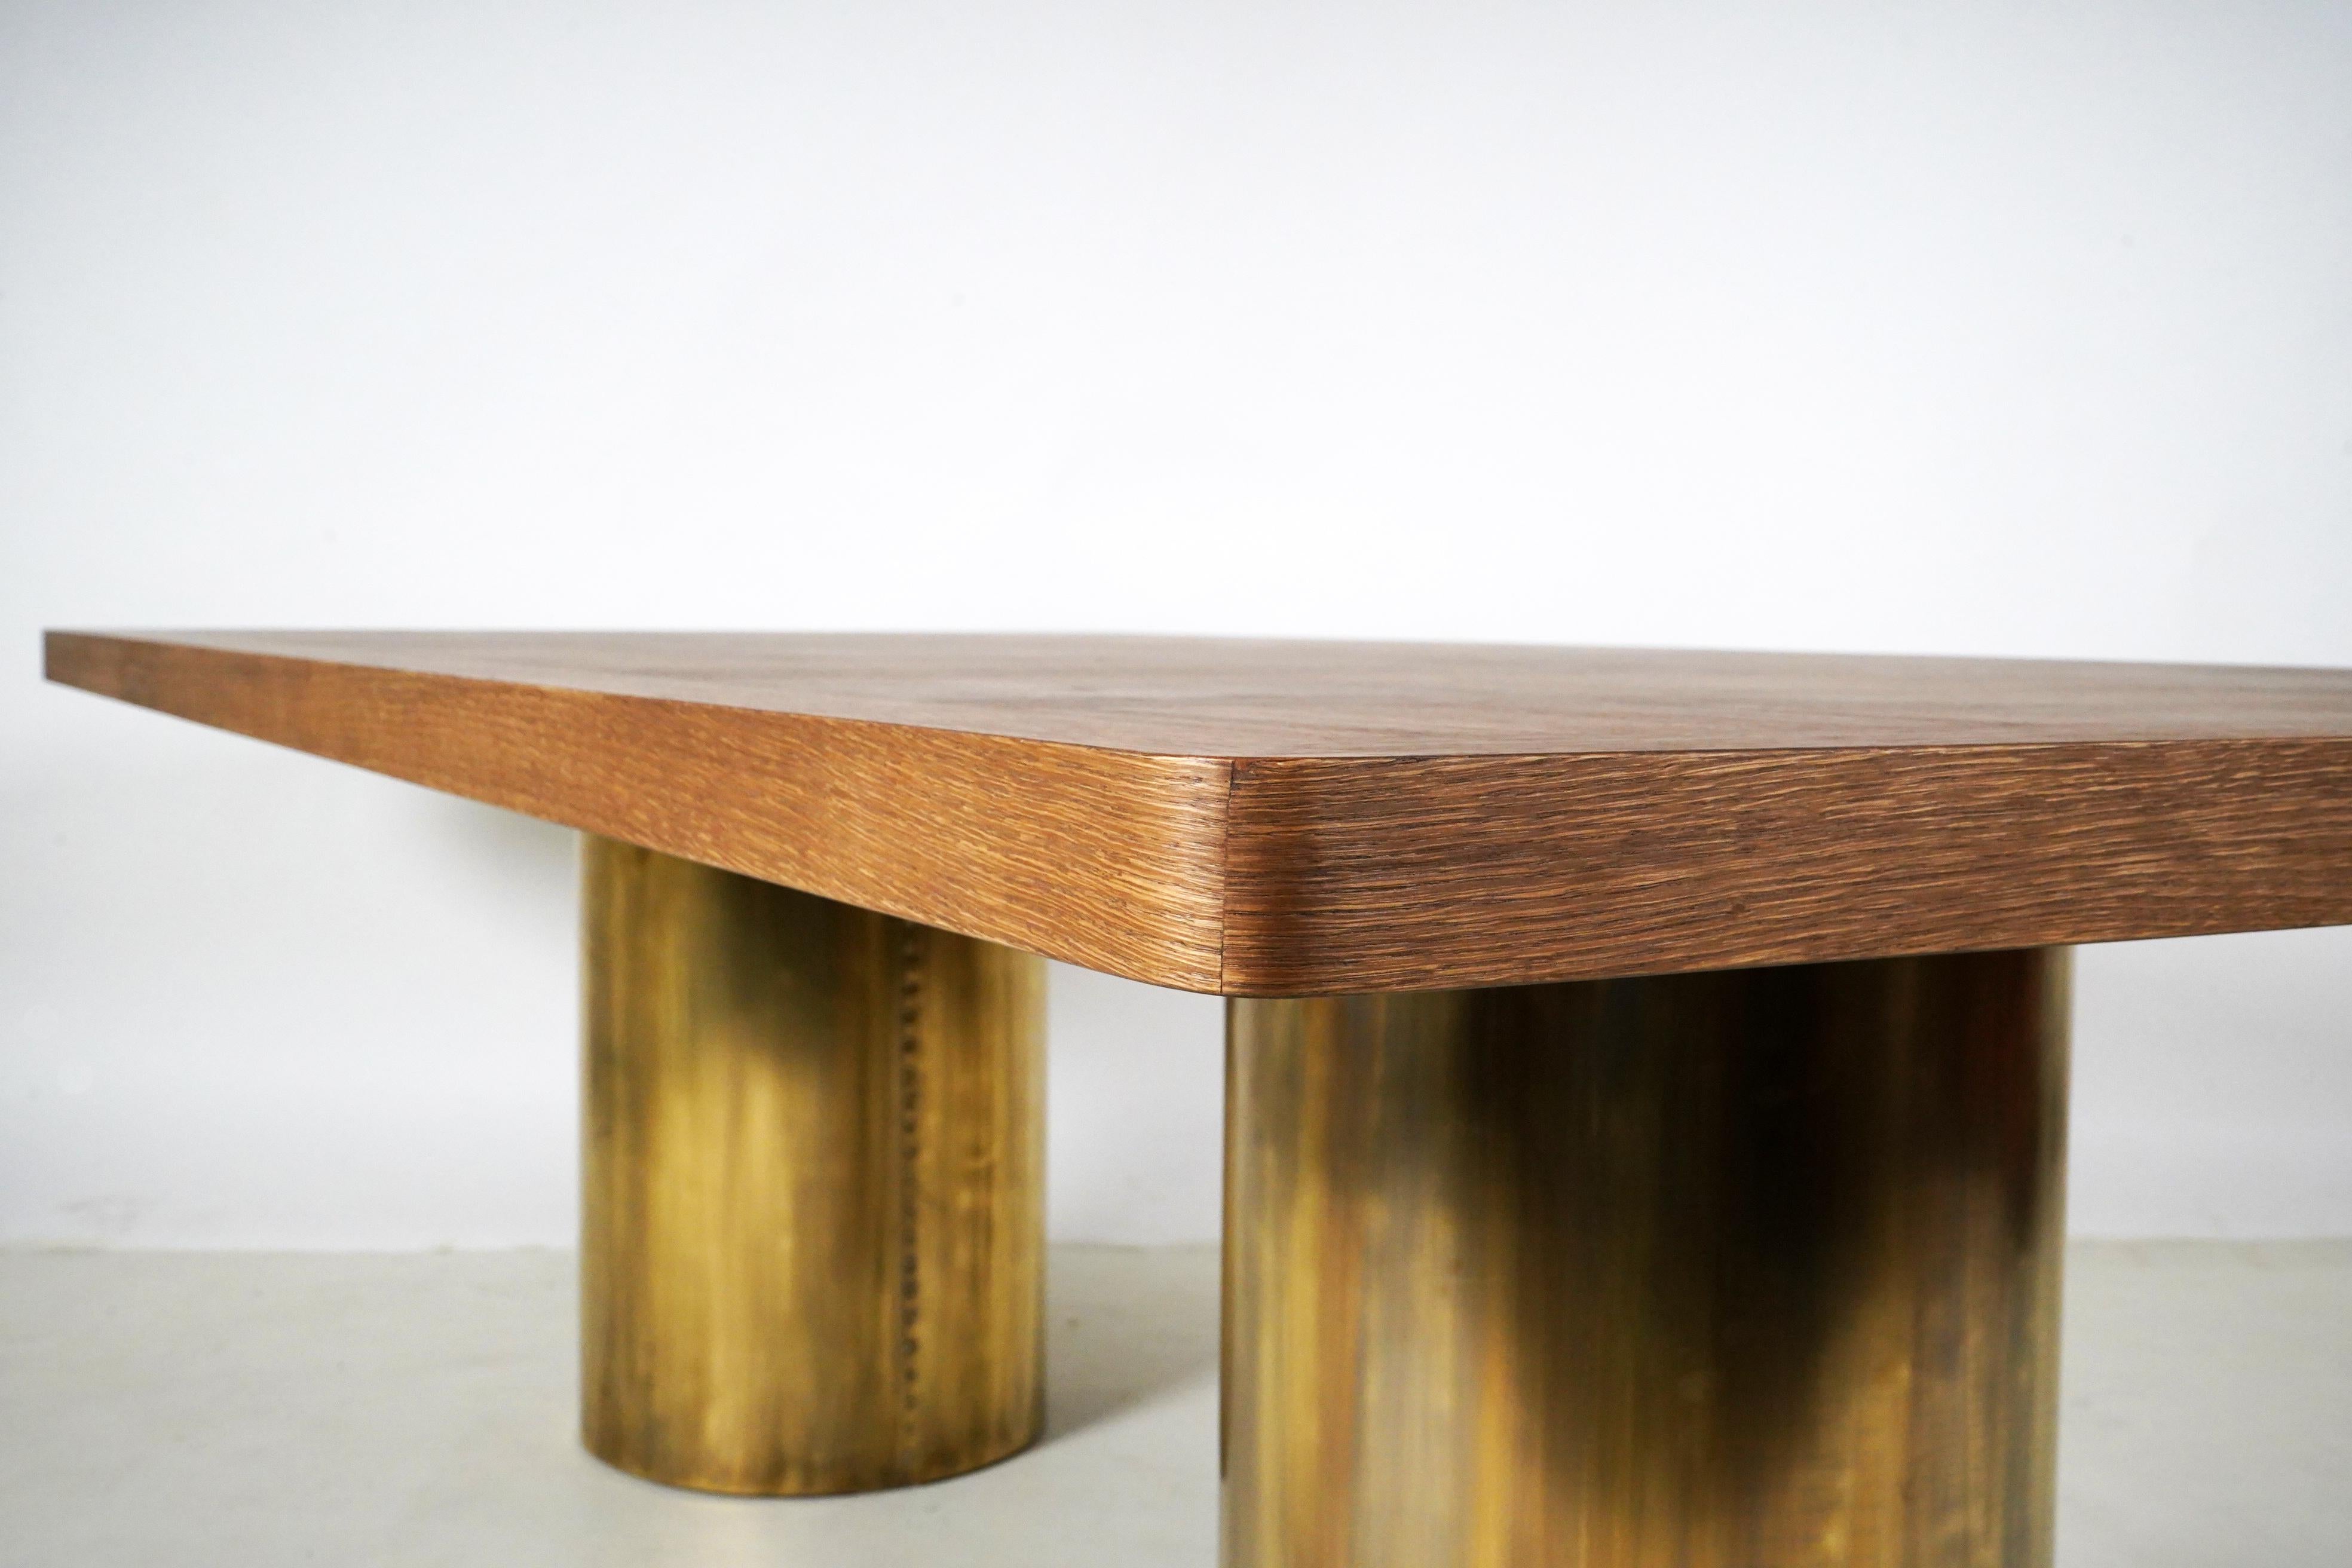 Contemporary Rectangular Dining Table with Oak Parquet Top and Brass Pedestal Legs